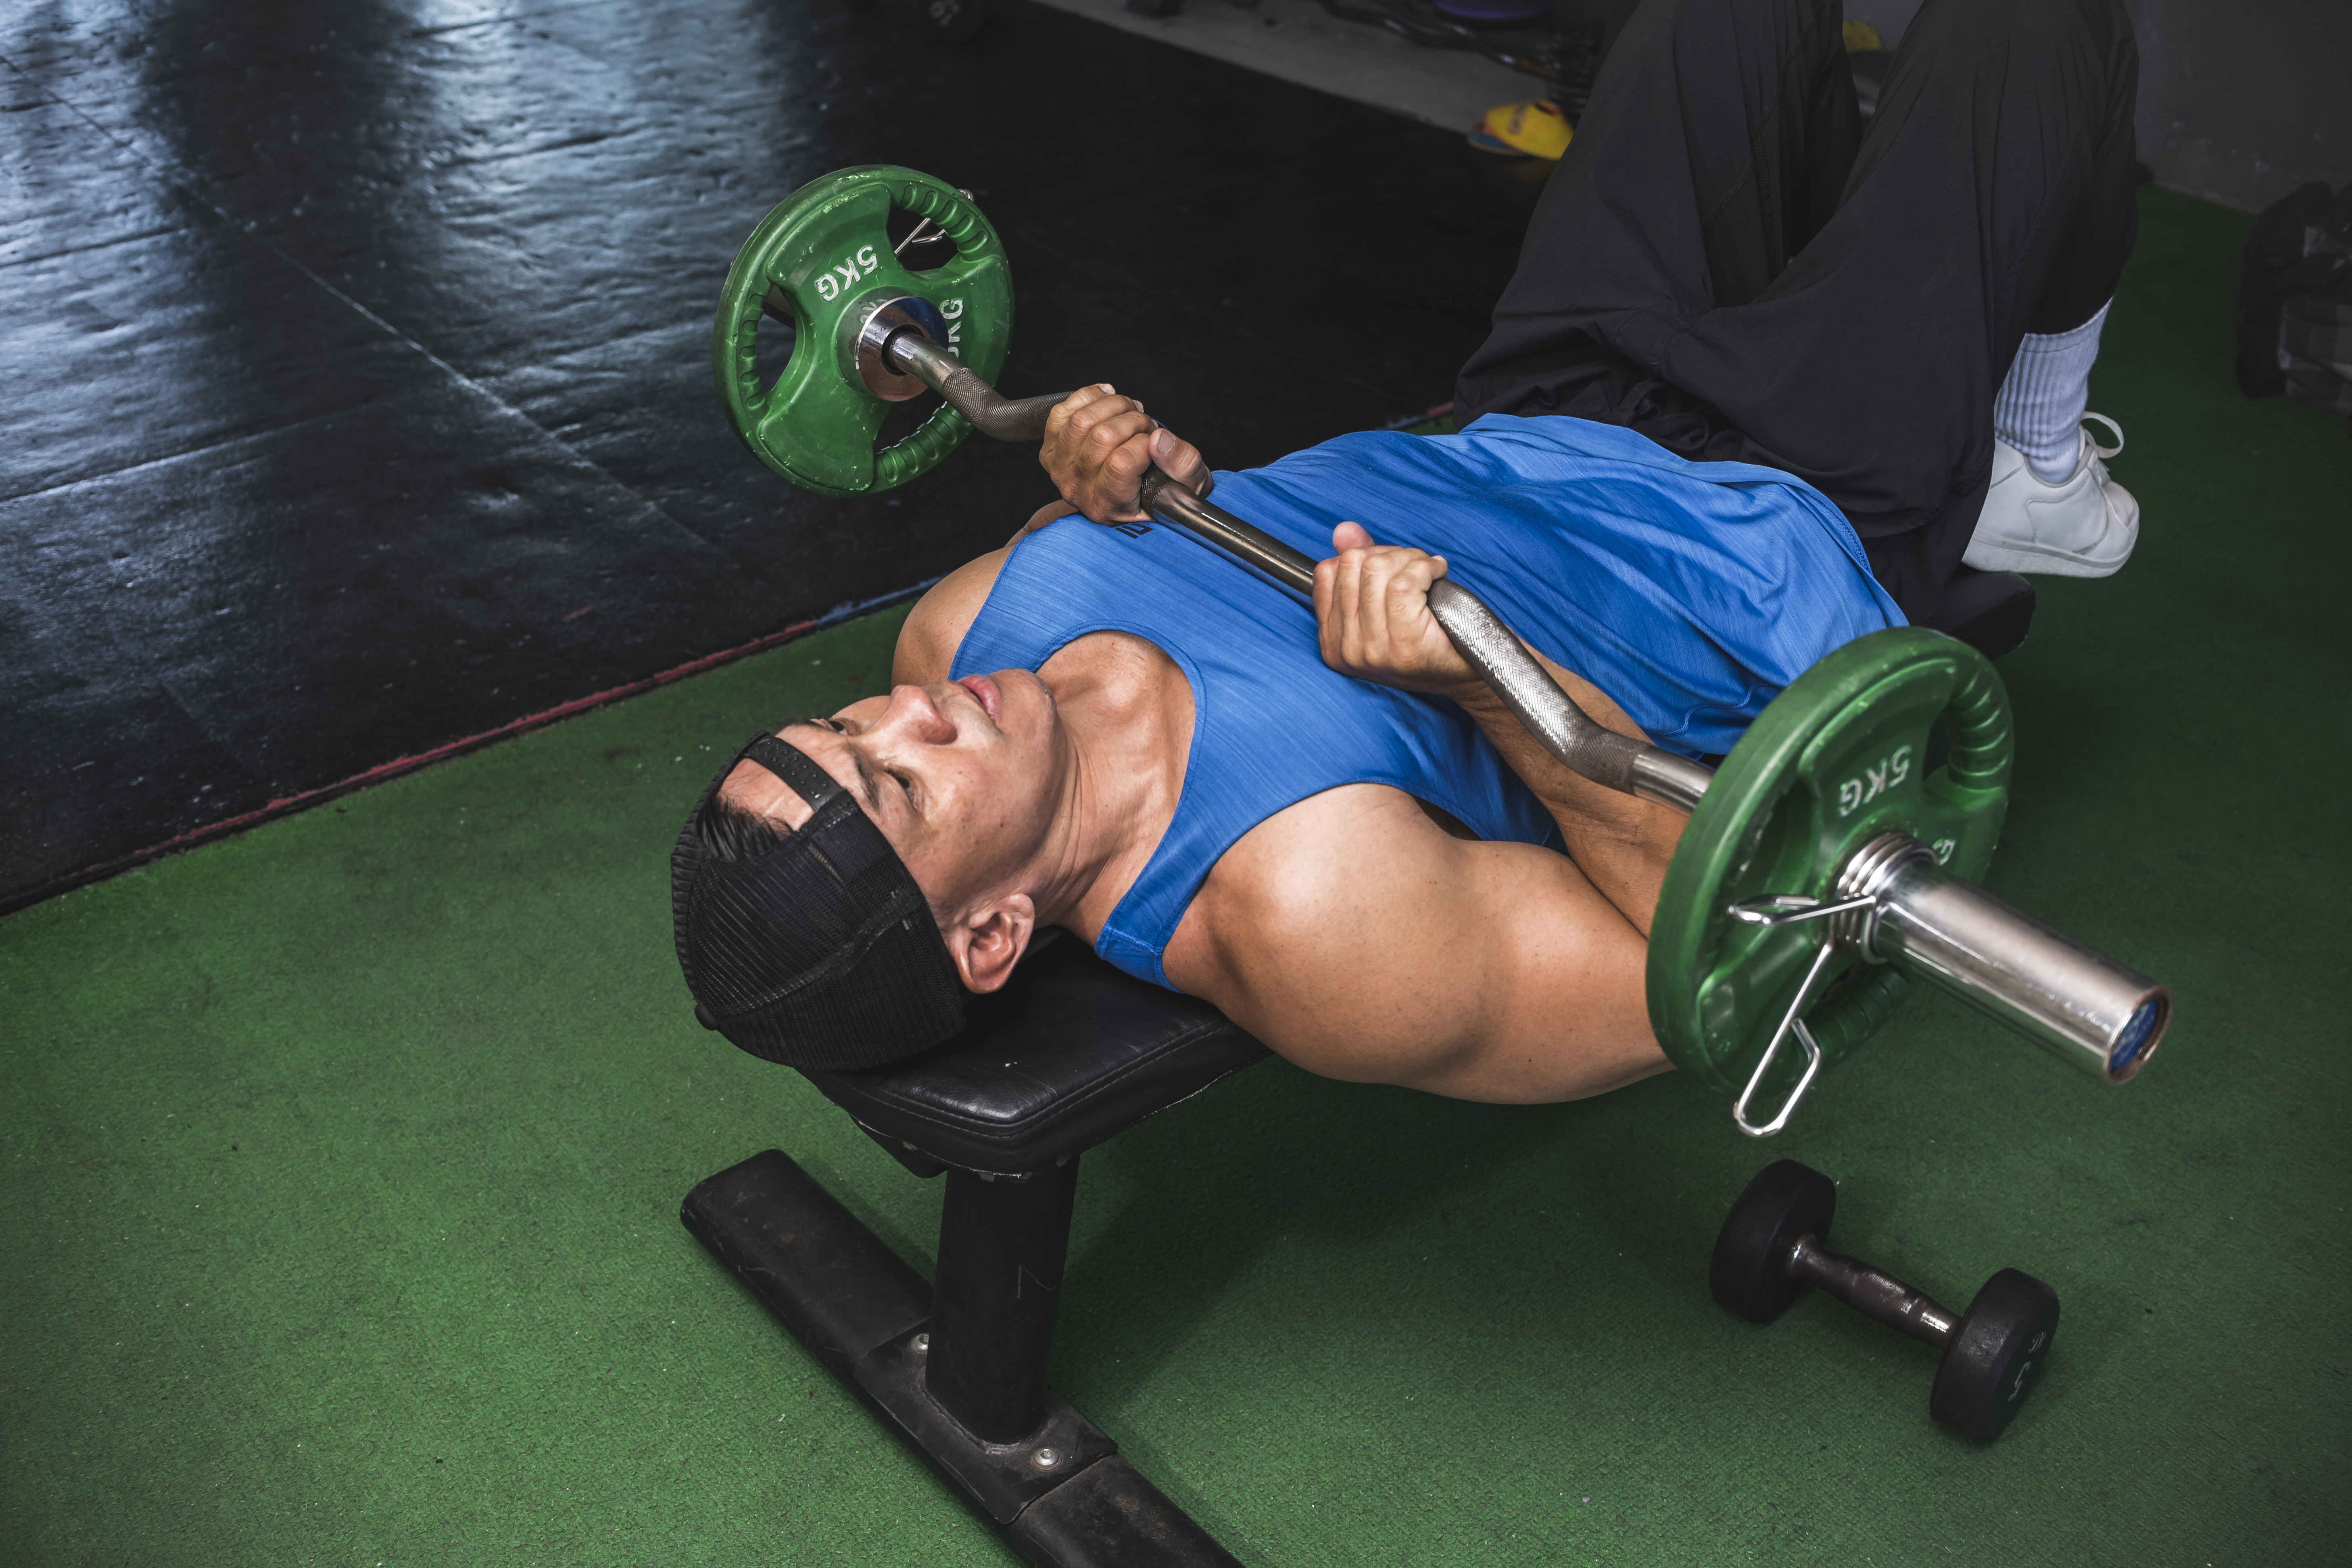 Bent Arm Barbell Pullover - Strong Lats Through Proper Form